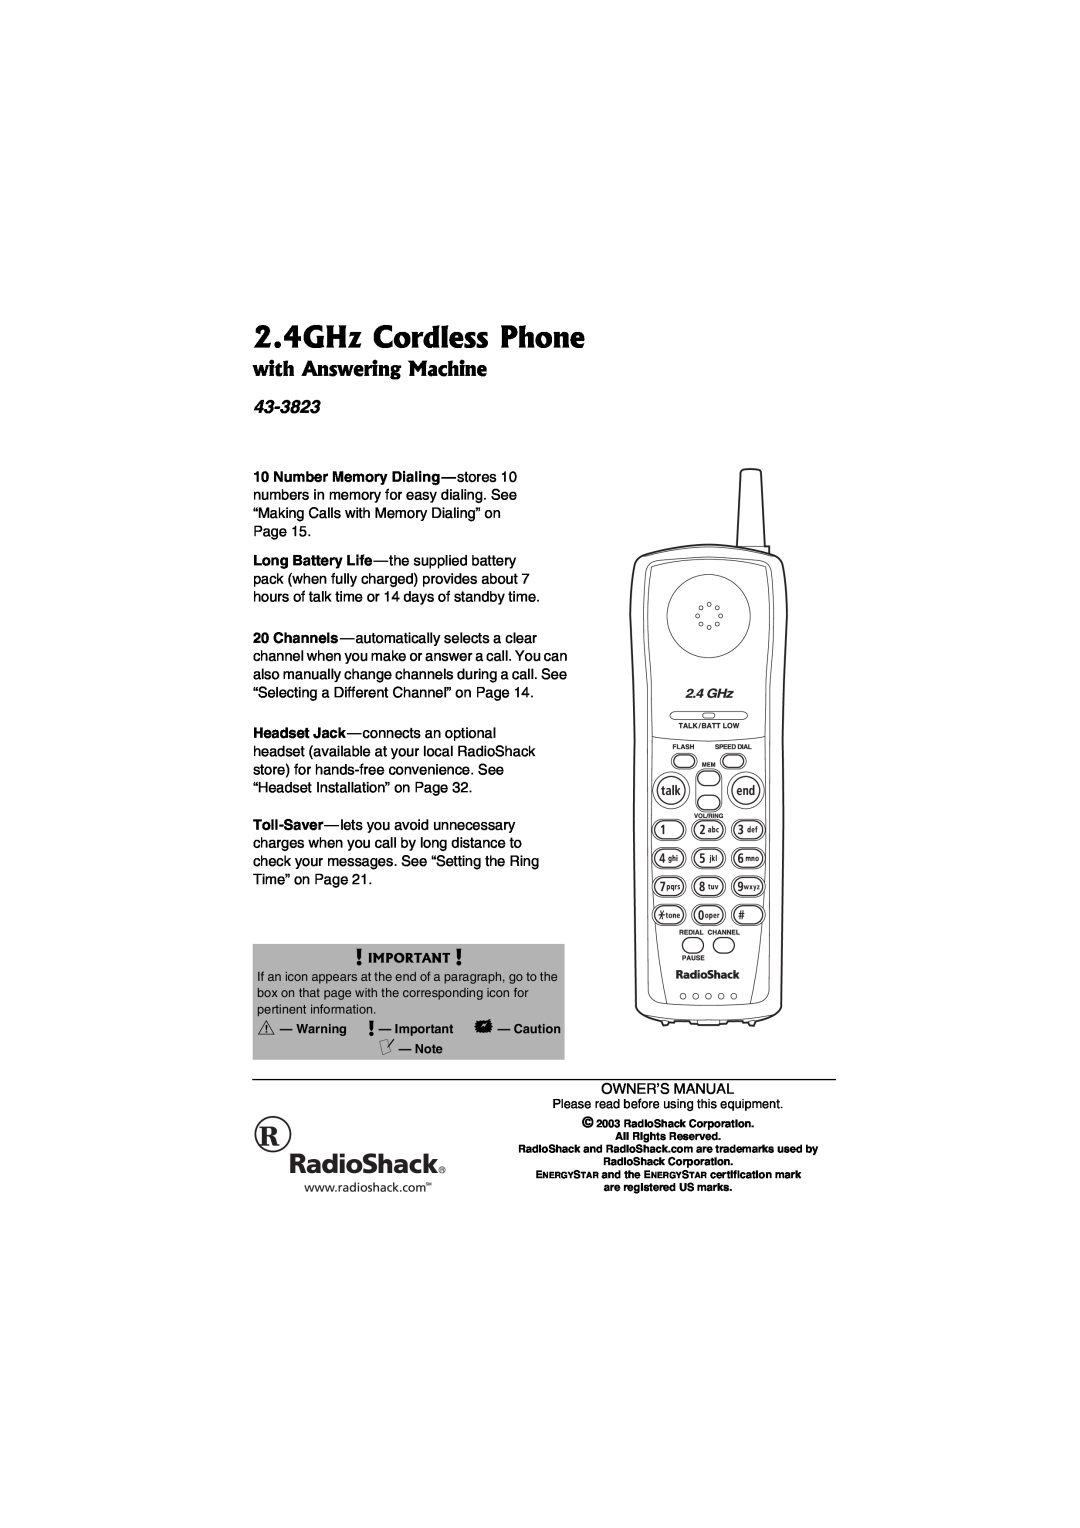 Radio Shack 43-3823 owner manual with Answering Machine, 2.4GHz Cordless Phone 